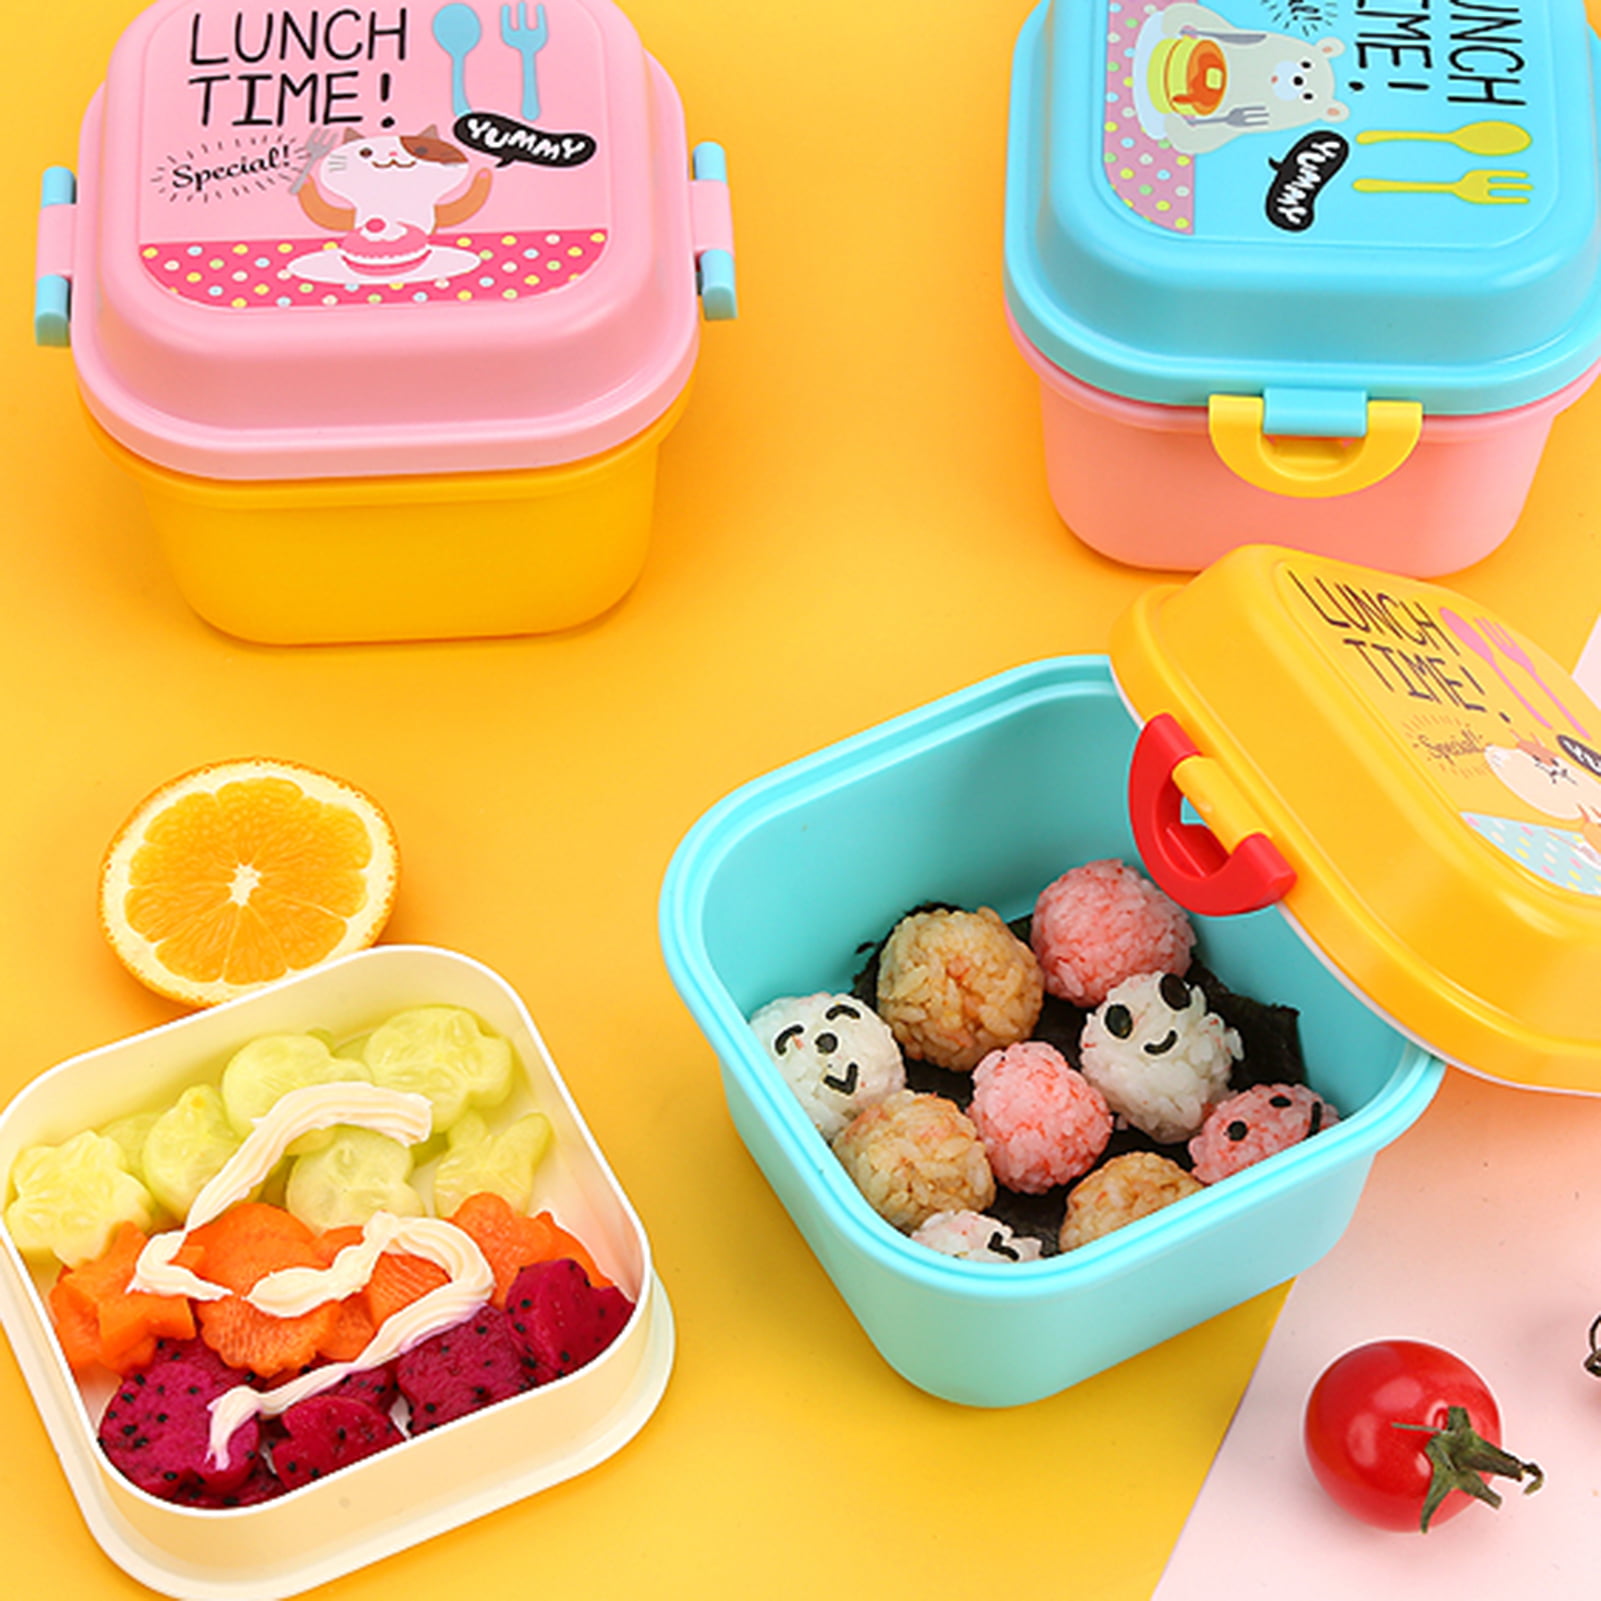 Mothercould Snack Box Set for Kids - 8 Compartments, Reusable Snack  Solution with 100 Dissolvable Labels | Easy to Clean, Dishwasher Safe,  BPA-Free